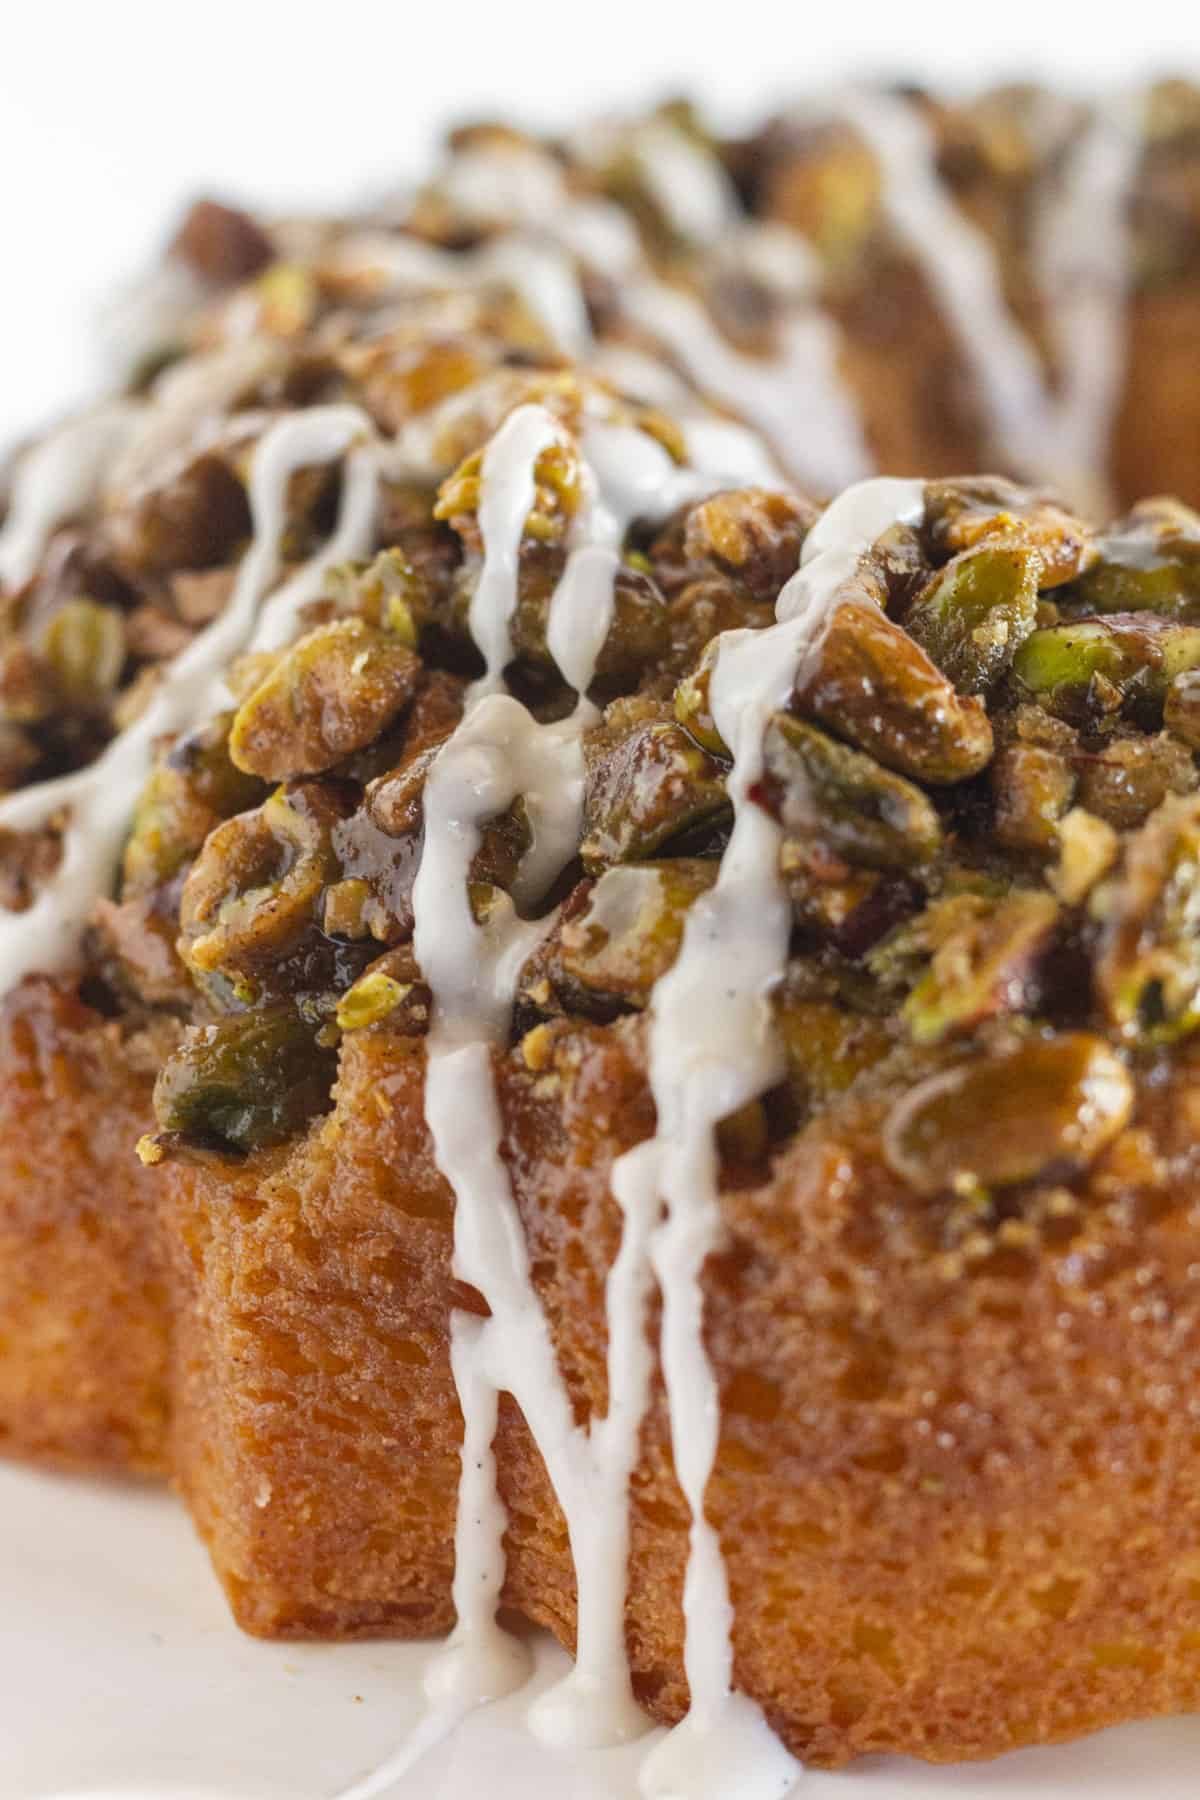 A close up photo of the pistachio topping.